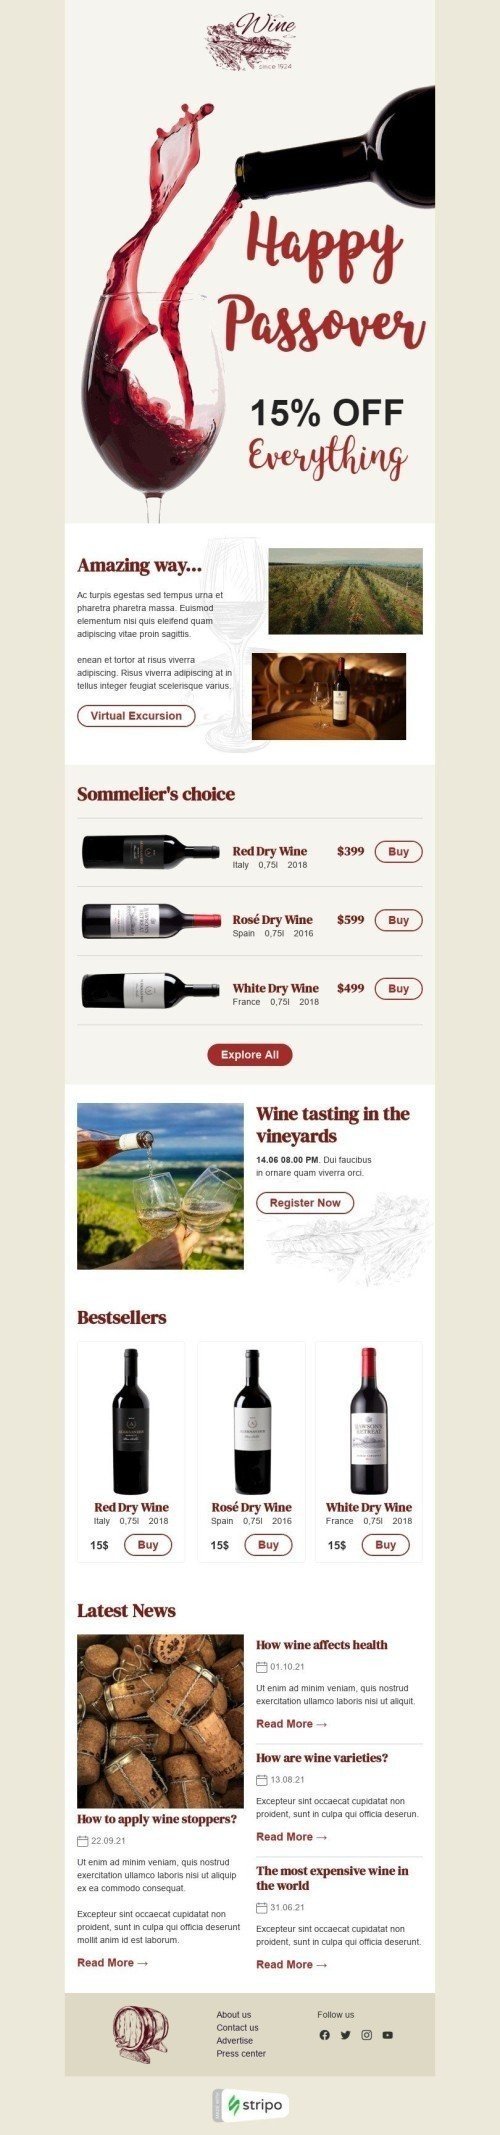 Easter Email Template «Sommelier's choice» for Beverages industry desktop view